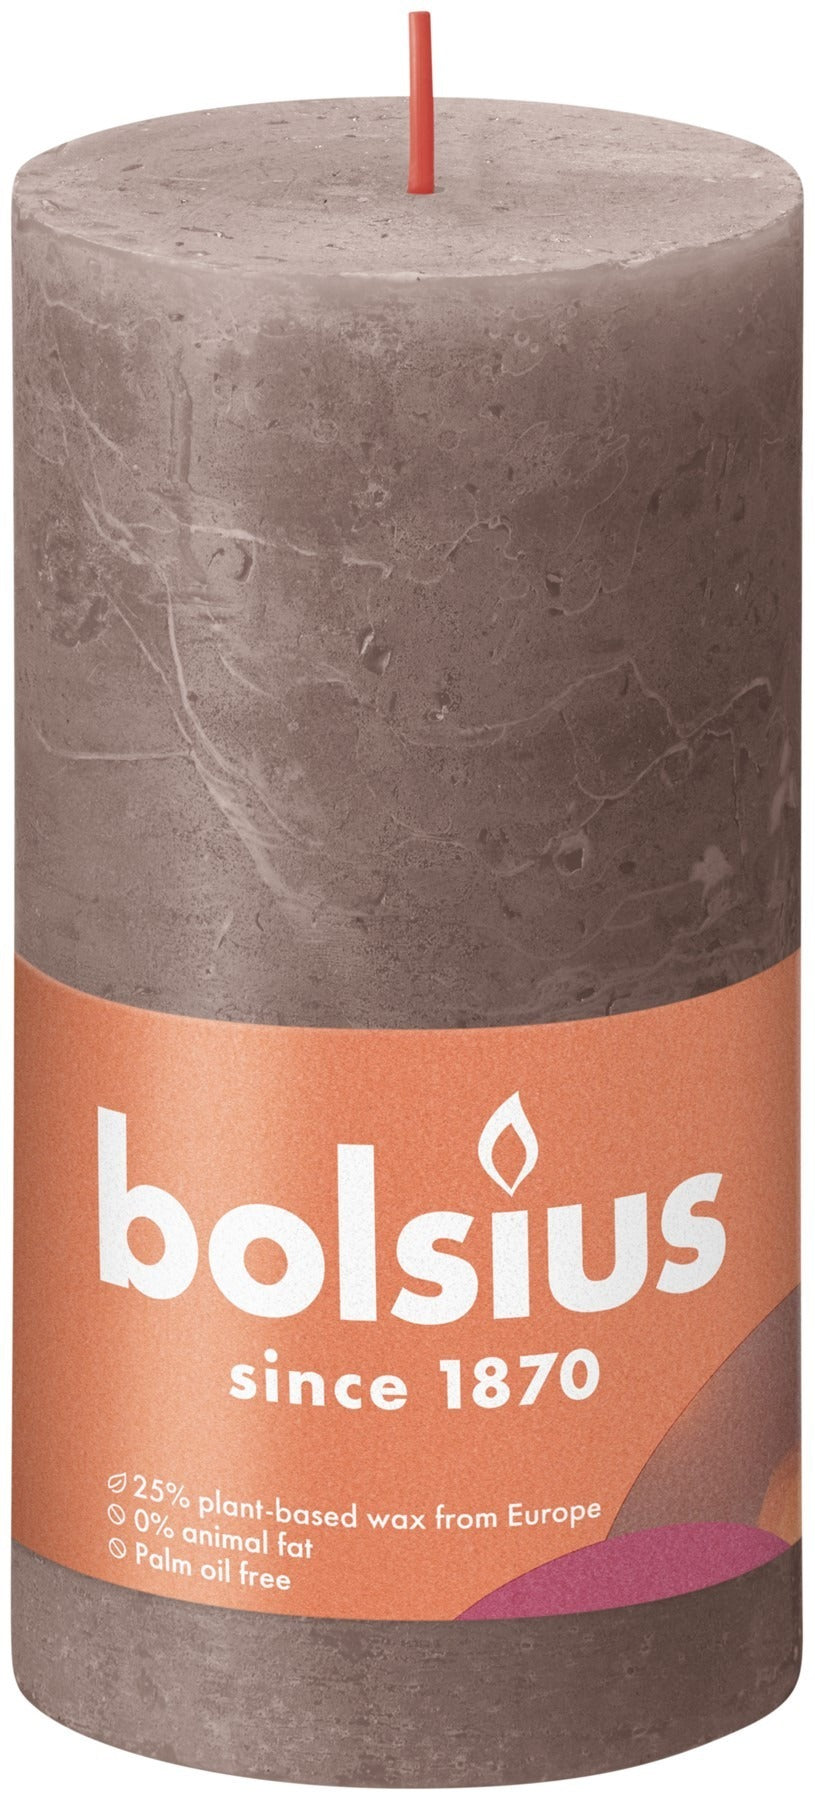 View Bolsius Rustic Taupe Shine Pillar Candle 130mm x 68mm information